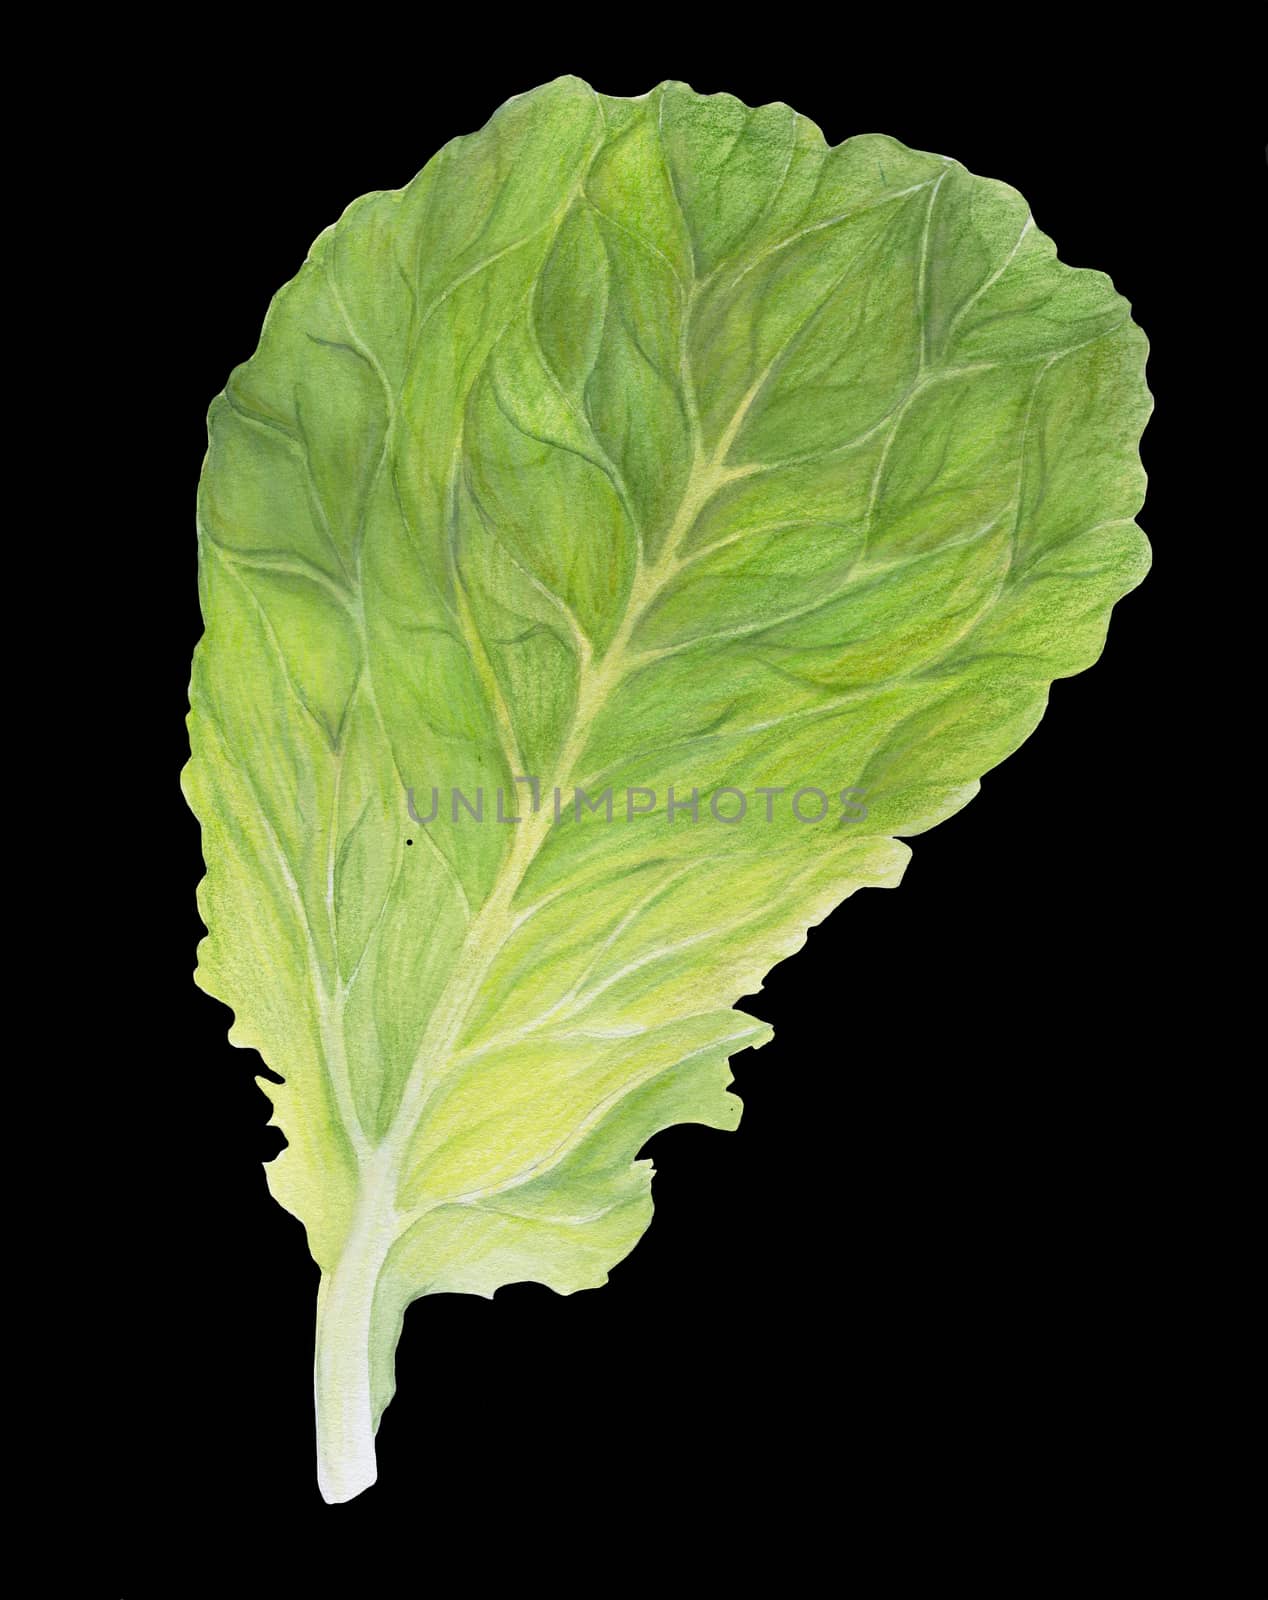 Fresh Lettuce. One Salad Leaf isolated on black background. Green dill. Watercolor illustration. Realistic botanical art. Hand Drawn. Vegetarian Ingredient. For logo, packaging, print, organic food by sshisshka